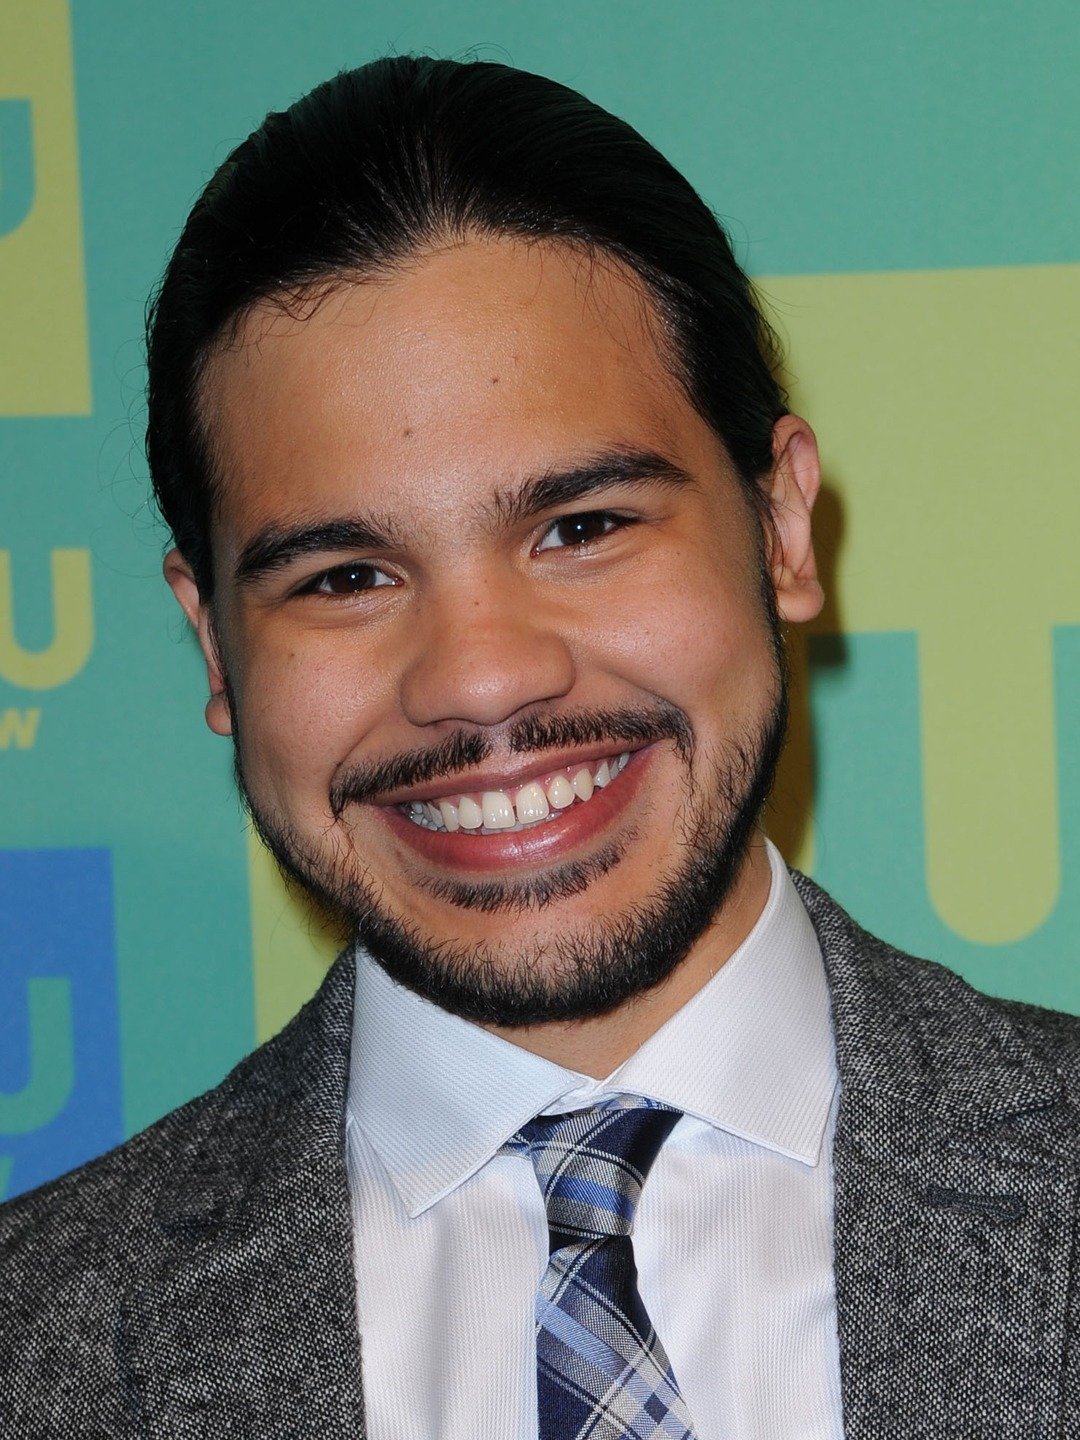 How tall is Carlos Valdes?